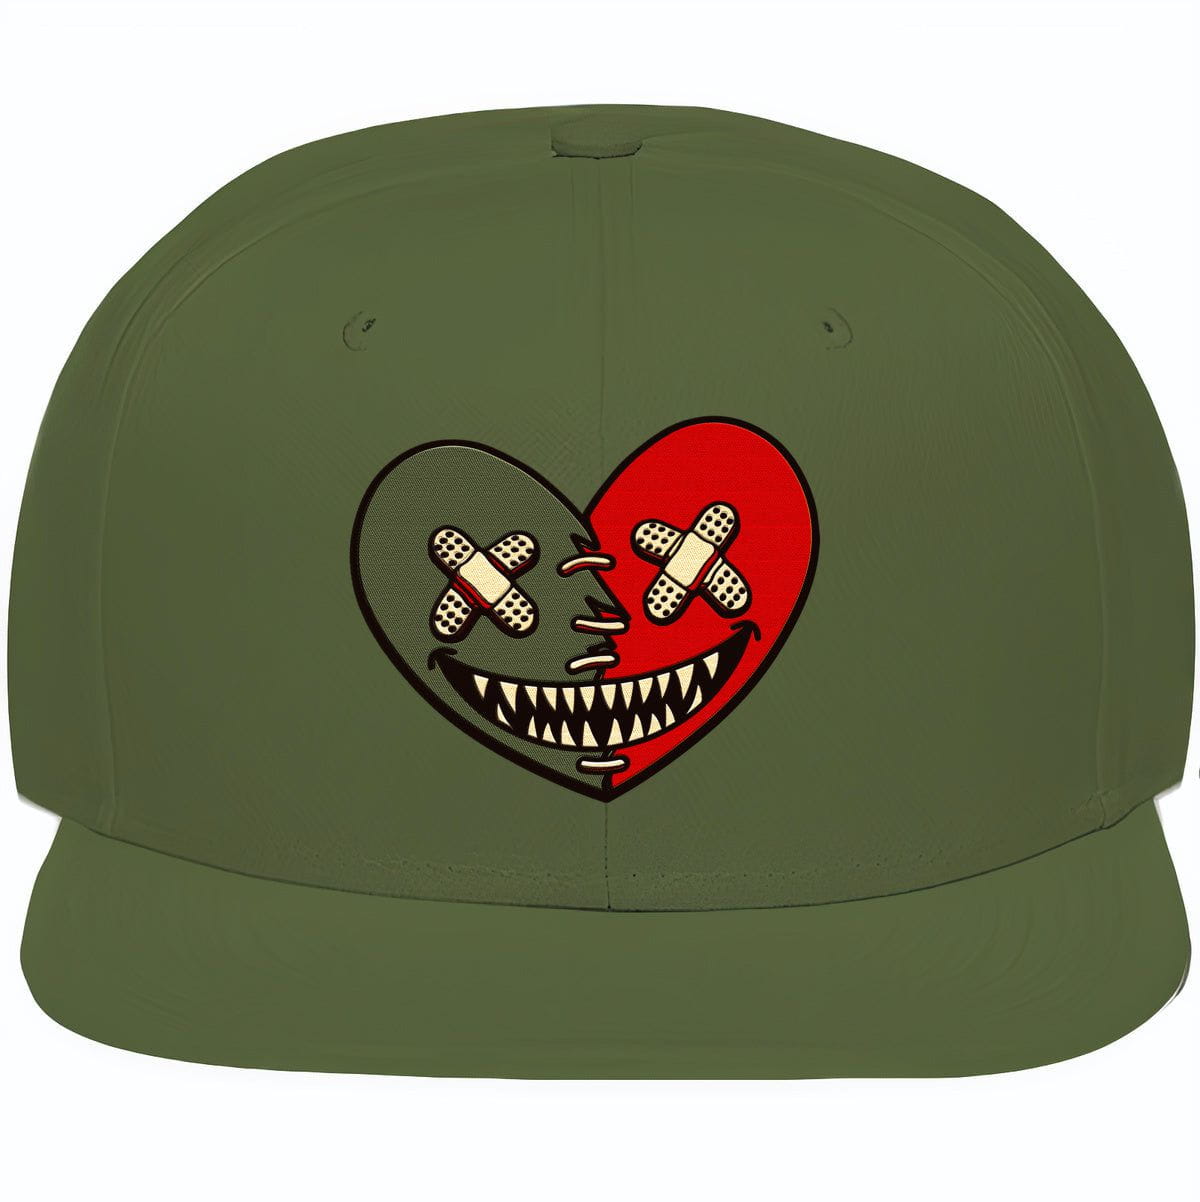 Mystic Red Cargo Dunks Snapback Hats - Olive Heart Baws